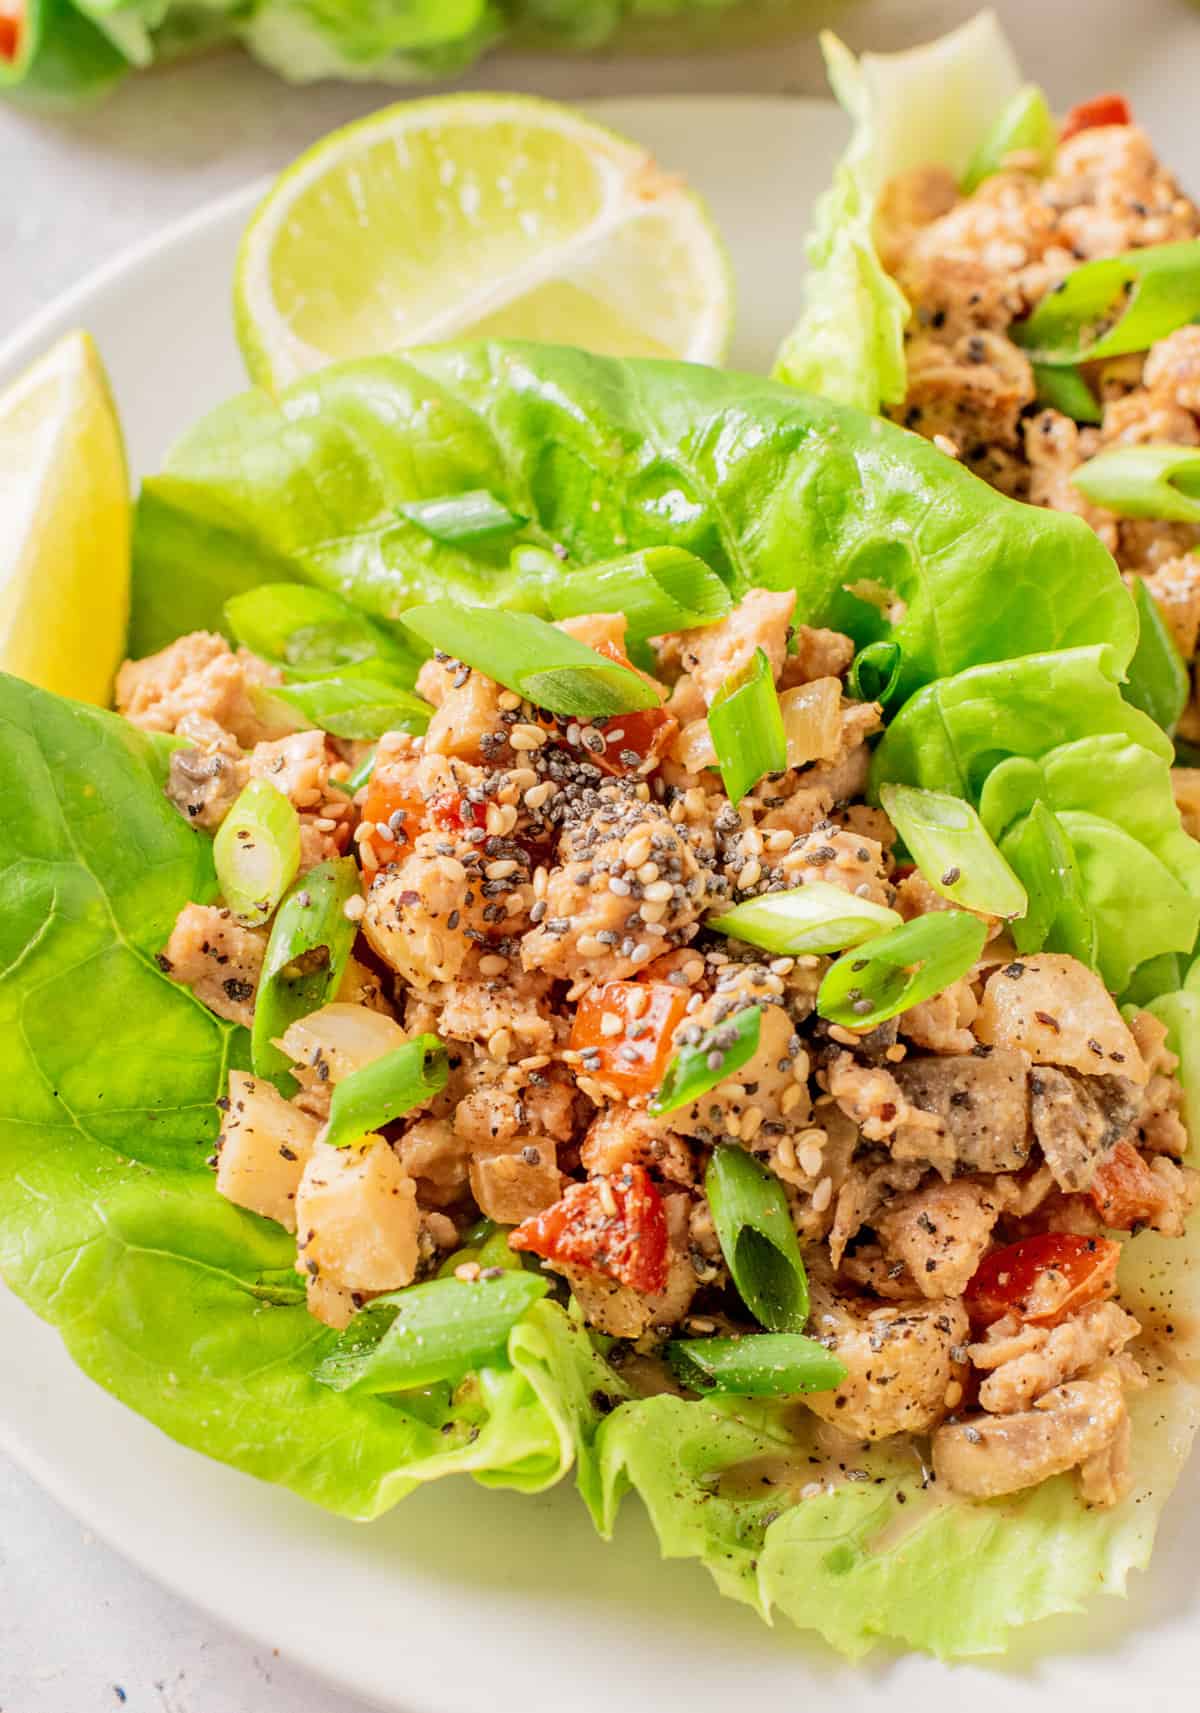 An open faced lettuce wrap is topped with sesame seeds.